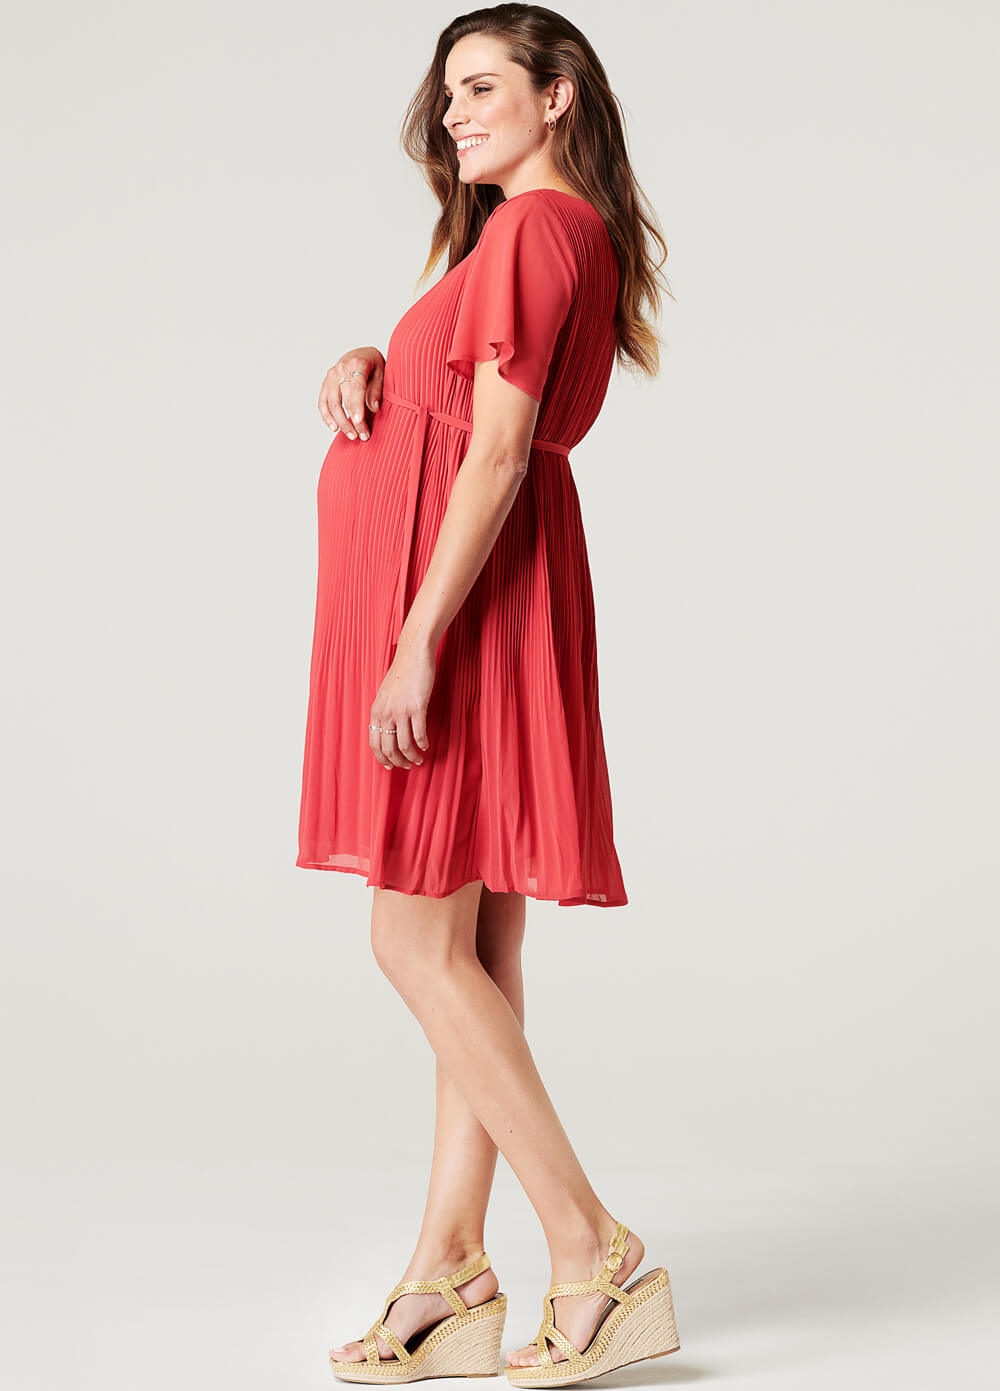 Noppies - Selsa Maternity Party Dress w Sash | Queen Bee